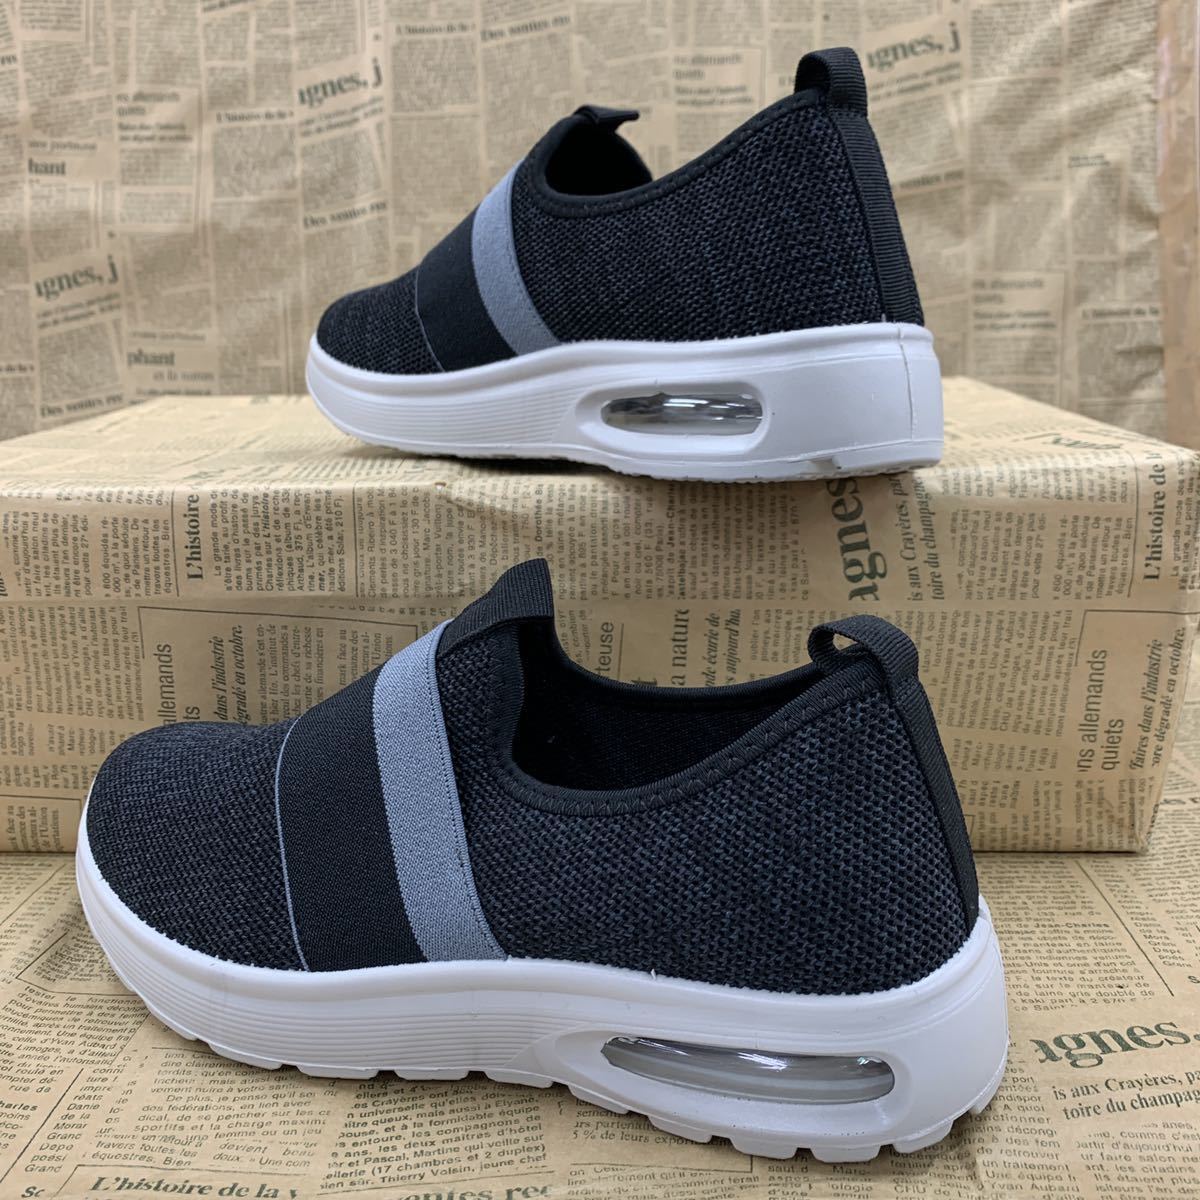  new goods lady's 23.0cm light weight air saw ru sneakers gum band slip-on shoes sport sneakers running shoes black black osw7248